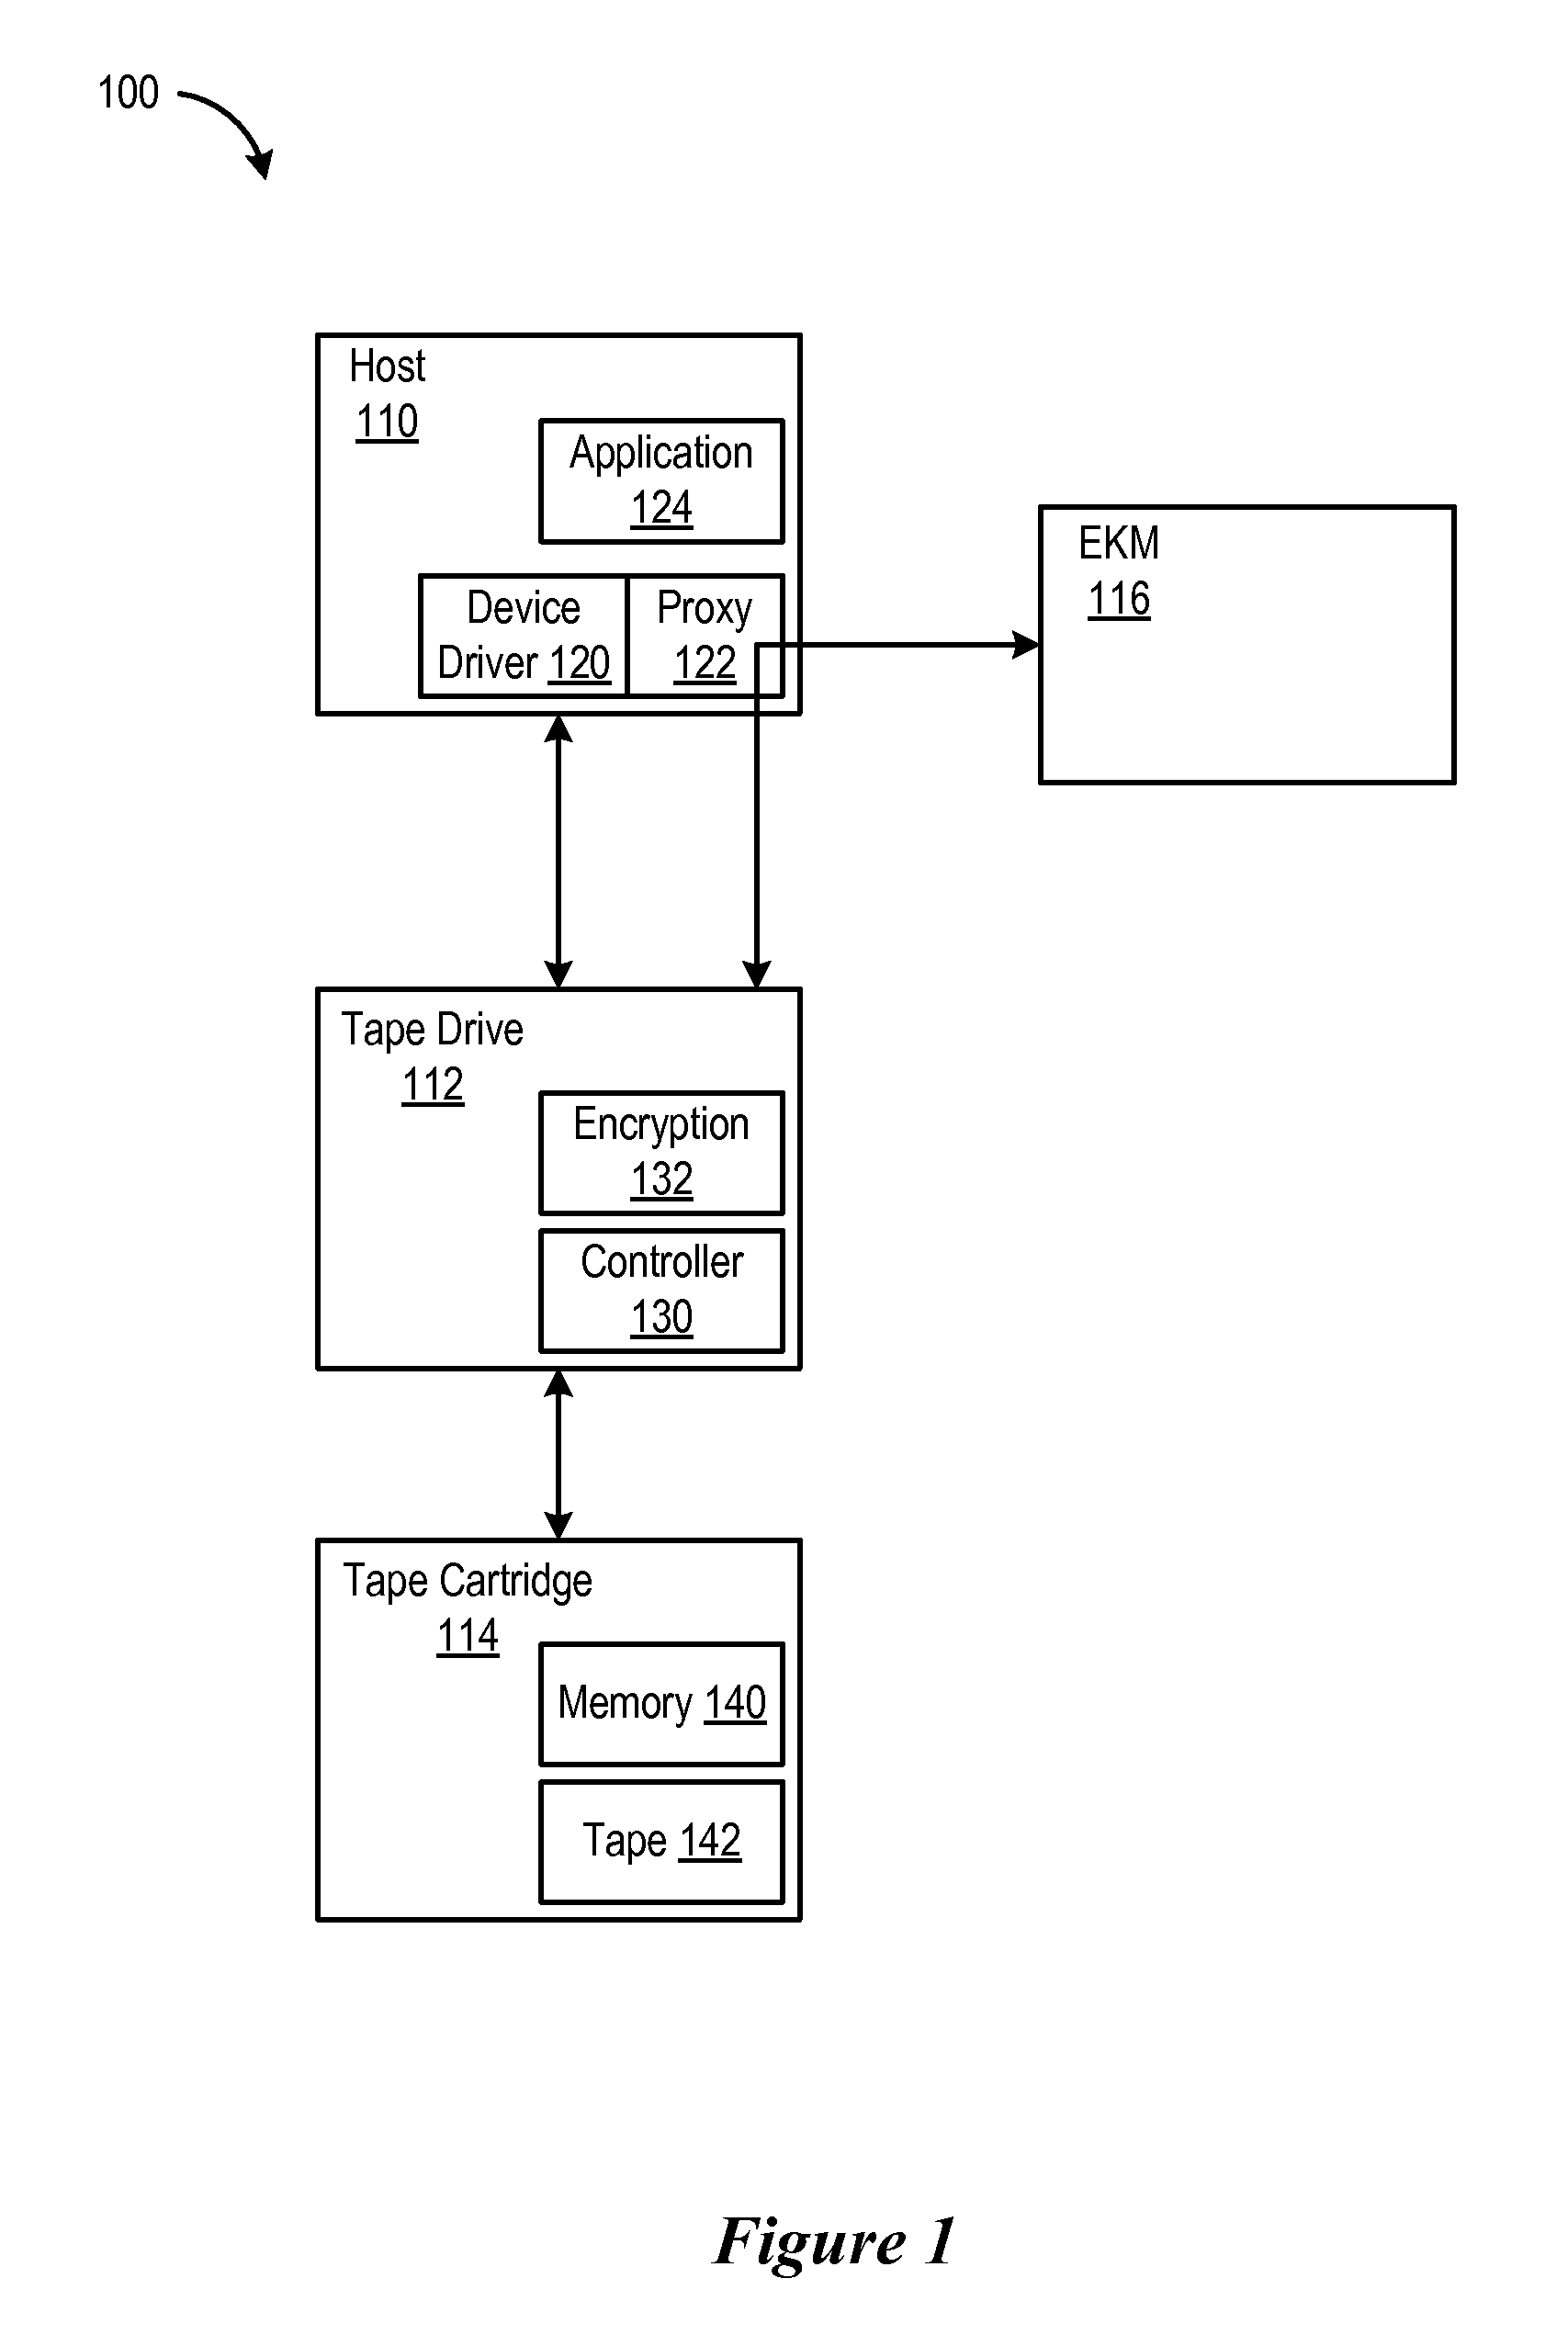 Use of Device Driver to Function as a Proxy Between an Encryption Capable Tape Drive and a Key Manager